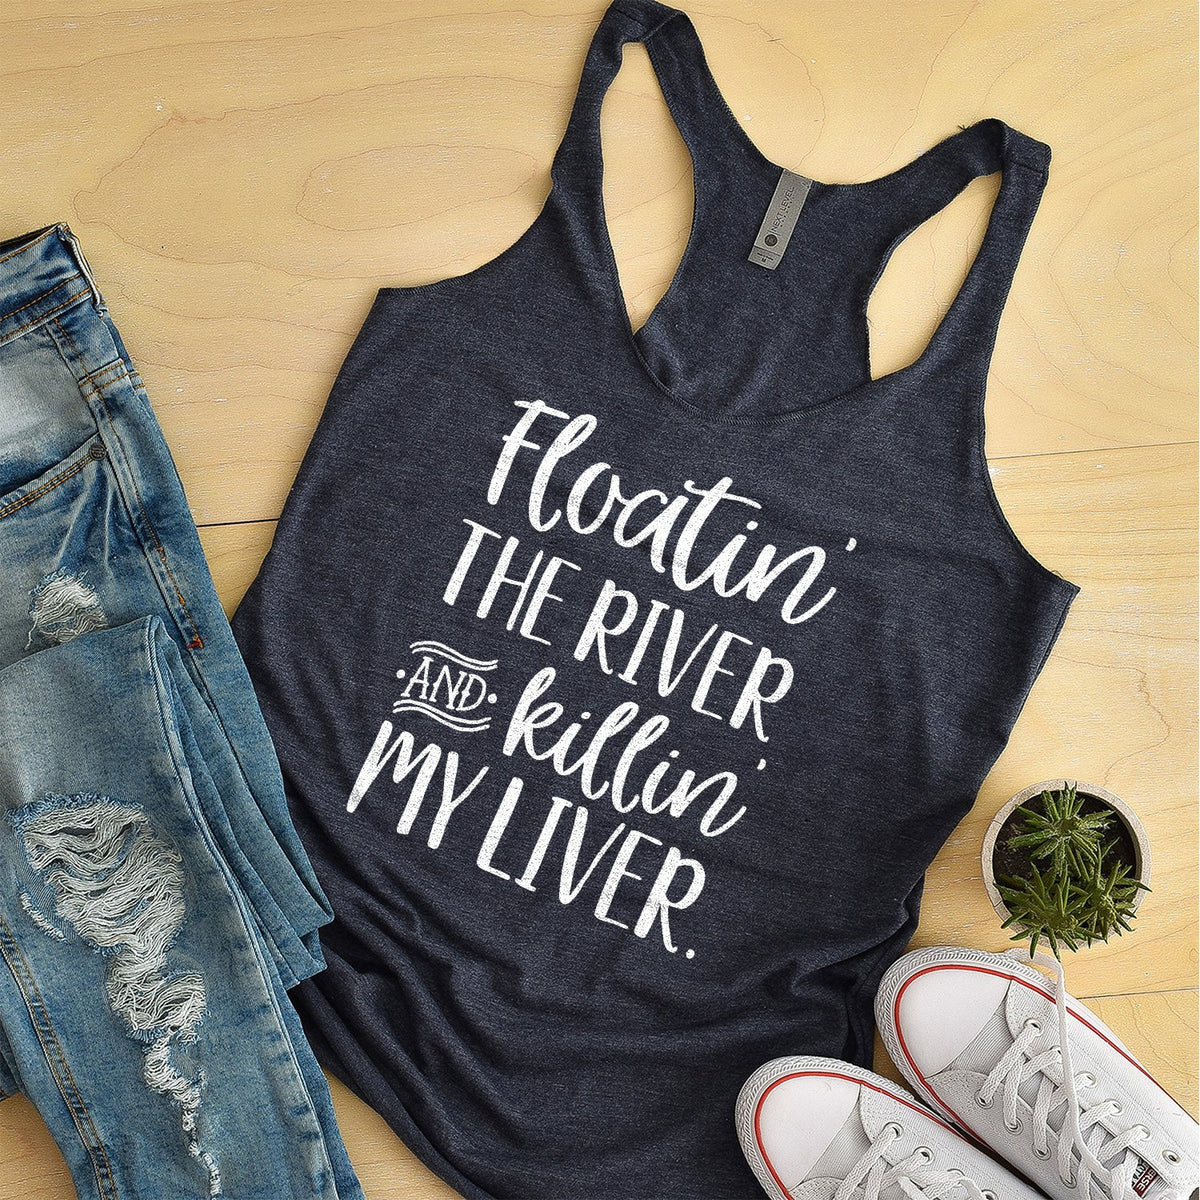 Floatin the River and Killin My Liver - Tank Top Racerback